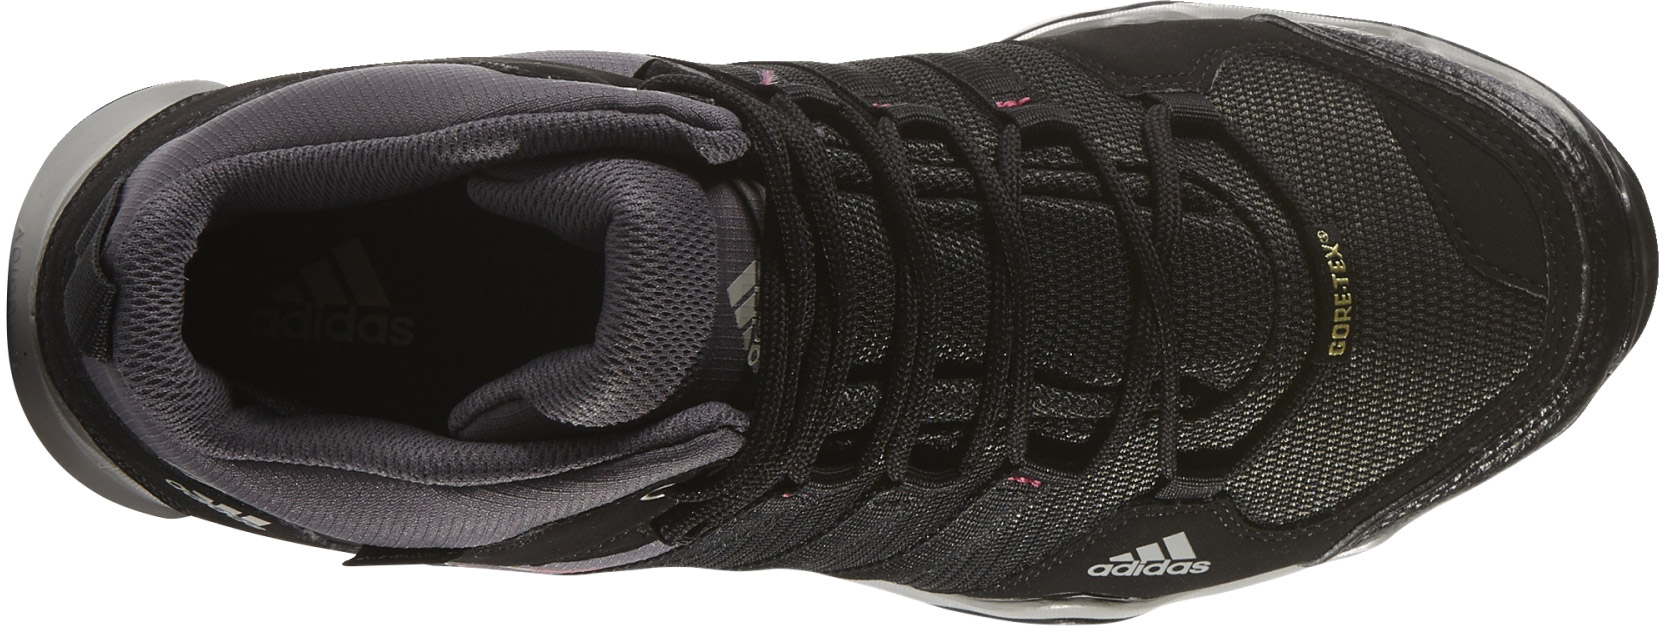 AX2 MID GTX W - Women's outdoor shoes